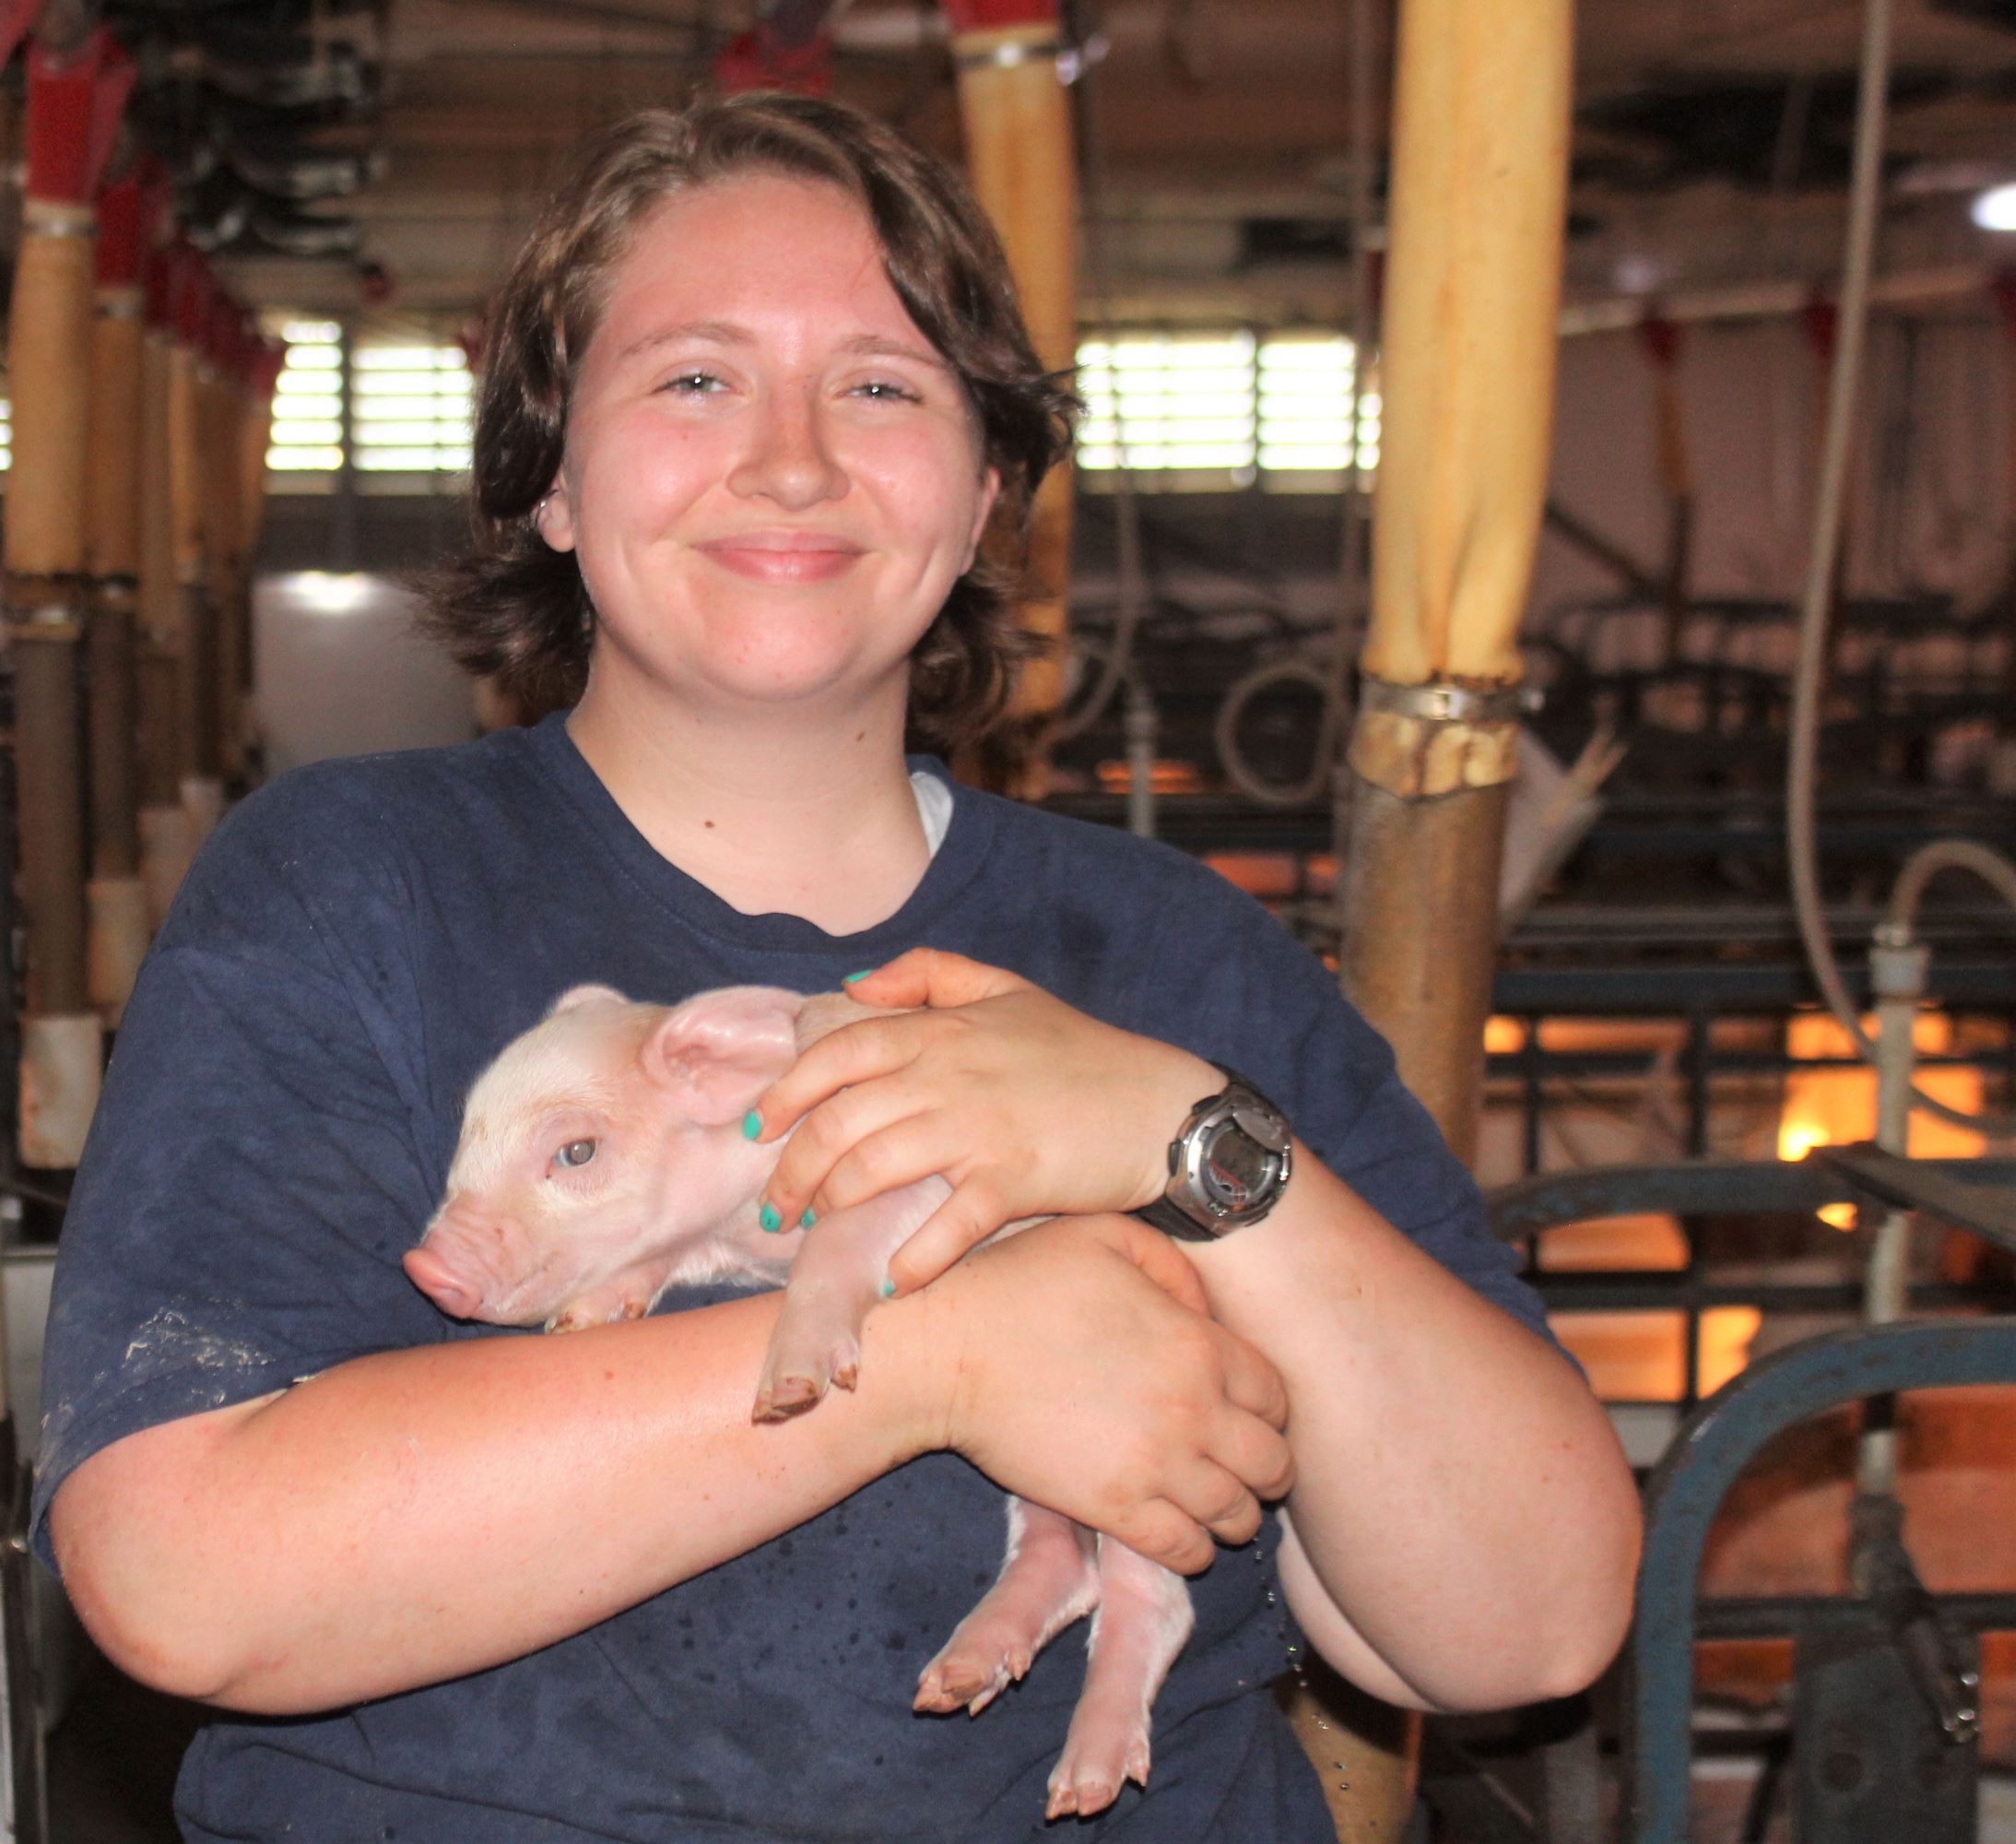 Megan holds a baby pig.